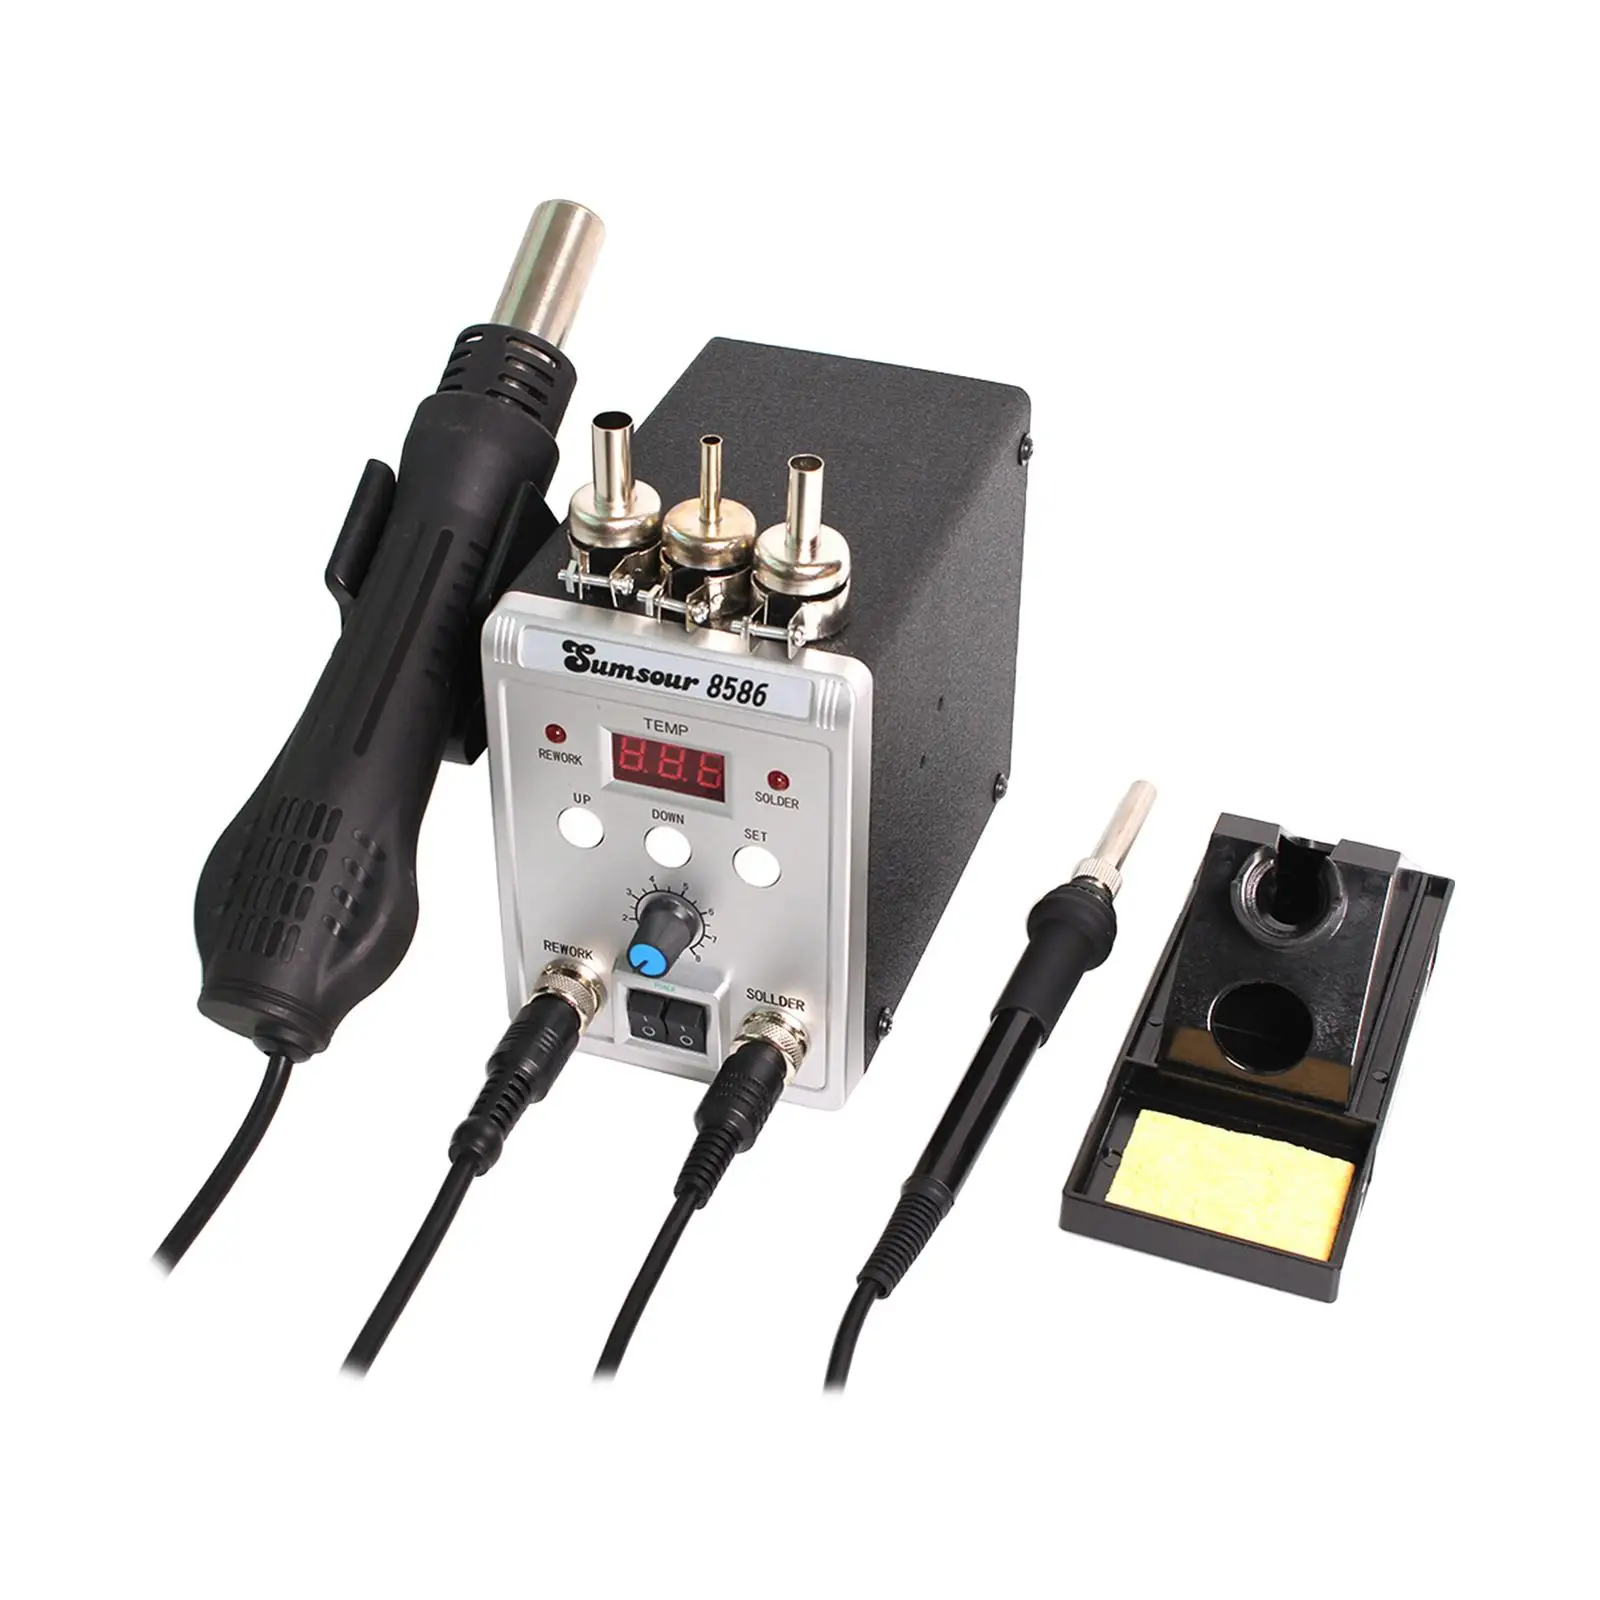 Electric Welding Tool Durable with Metal Holder 60W Soldering Station for DIY Repairs Phone Home Appliance Maintenance Laptop